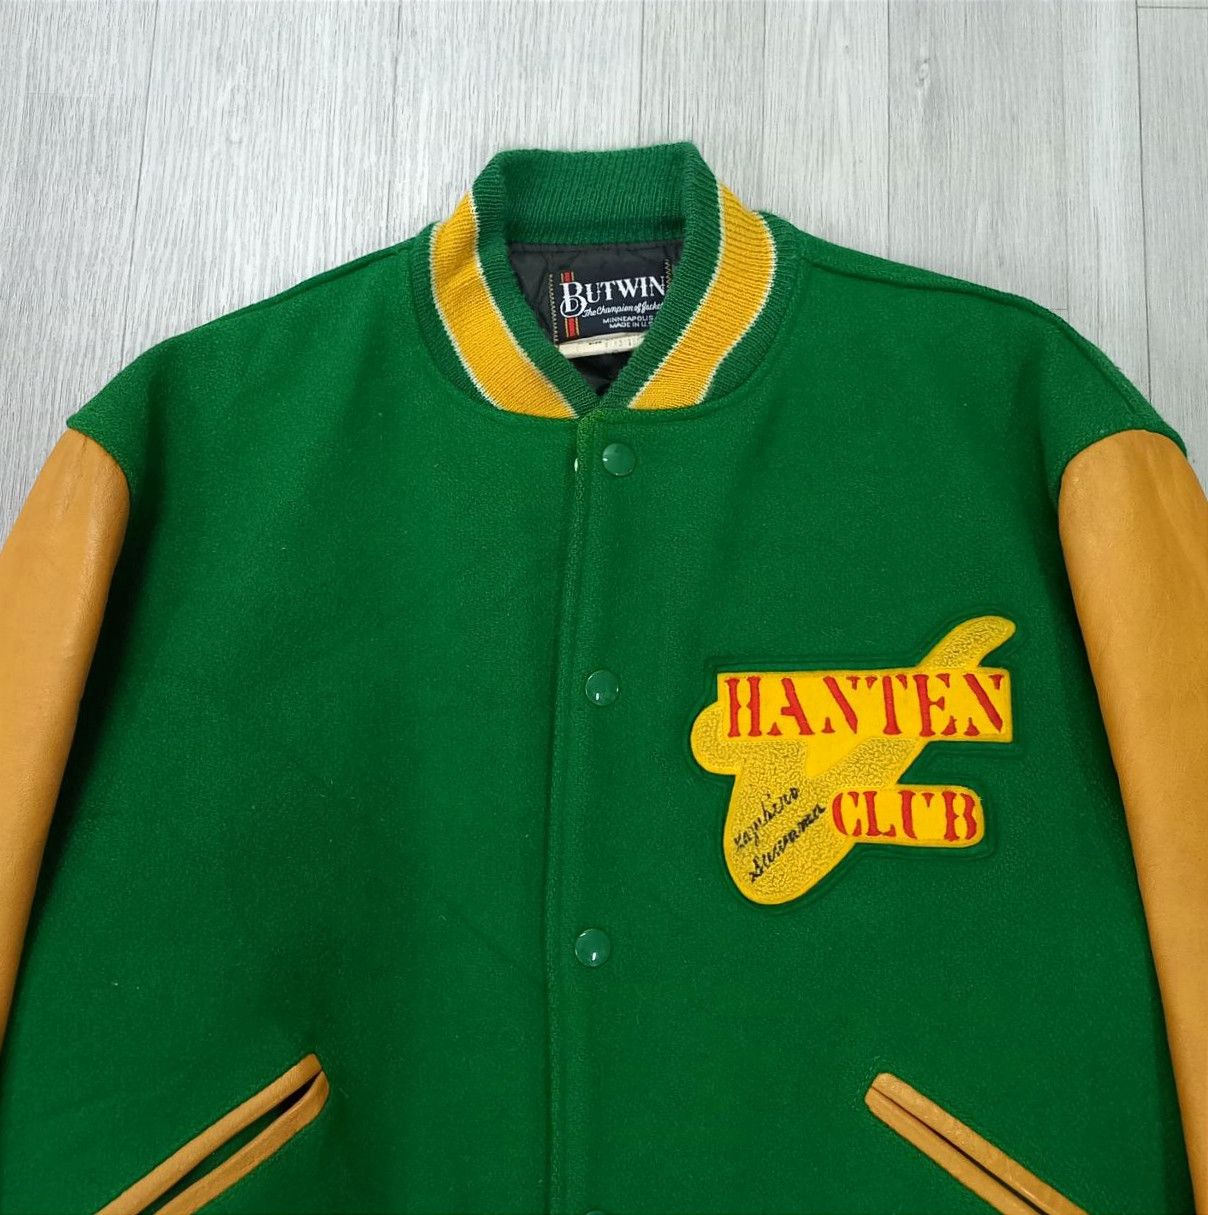 Union Made - HANTEN CLUB 1984 by BUTWIN USA Wool Leather Varsity Jacket - 8